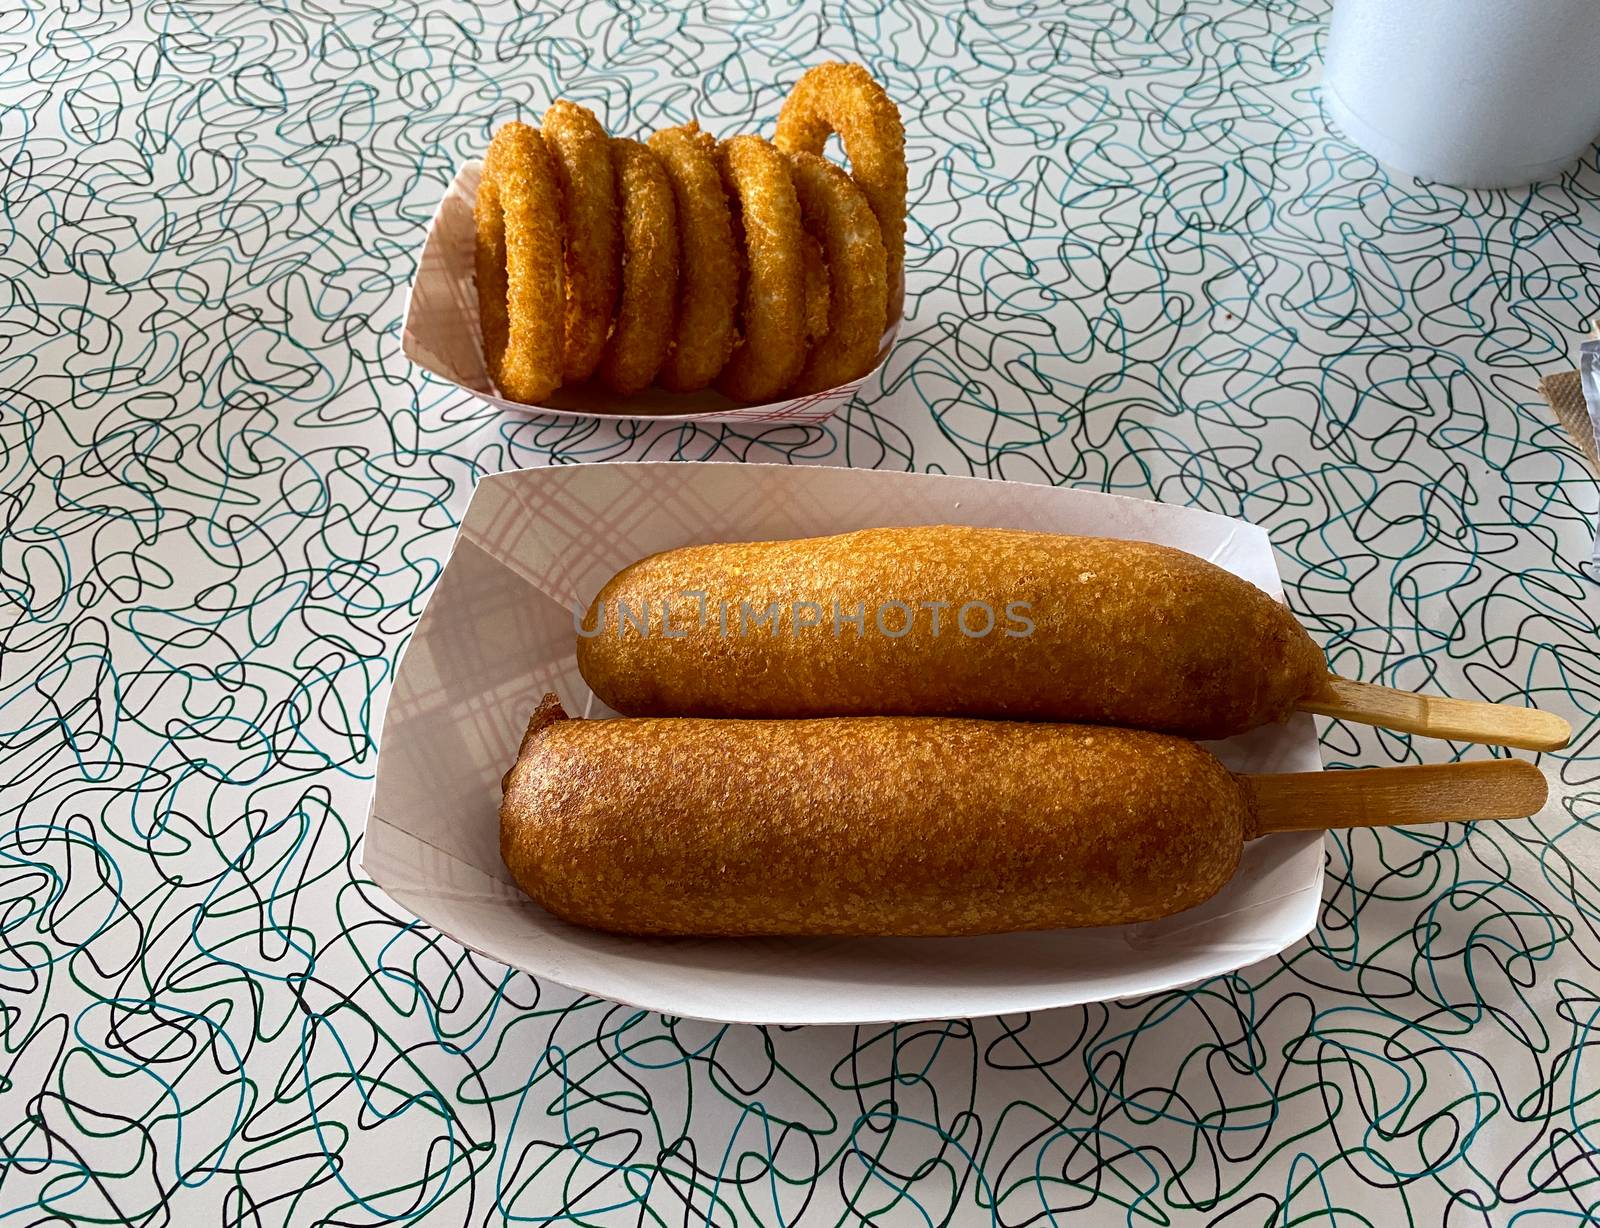 Two corndogs and a side of onion rings meal by Jshanebutt